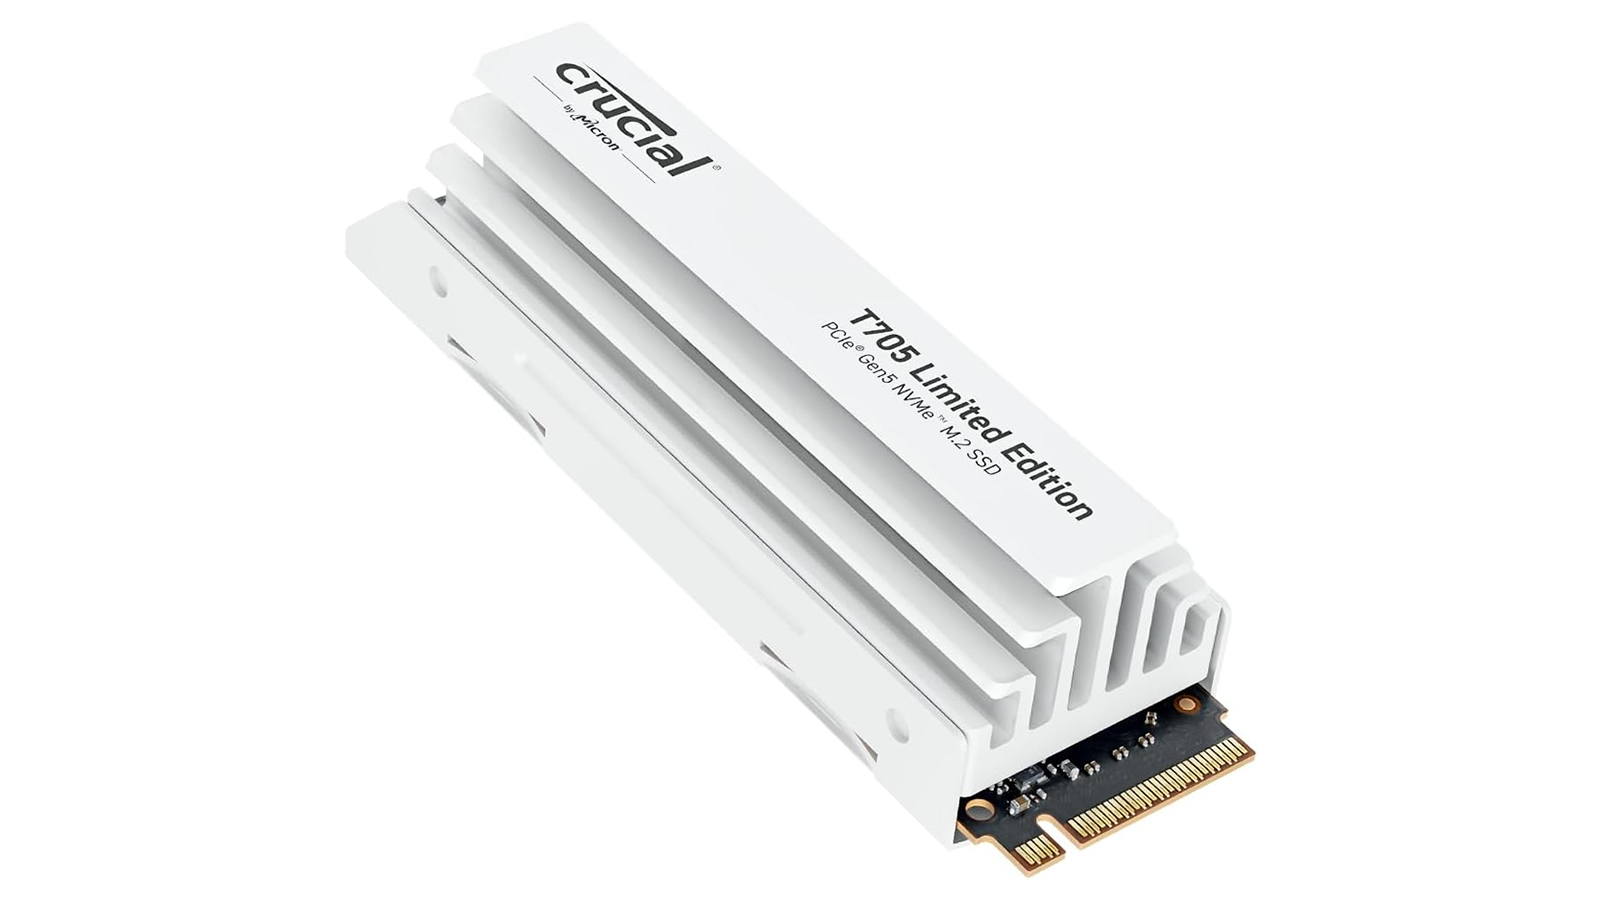 Crucial’s fastest SSD is getting faster – The 14.5 GB/s T705 PCIe 5.0 SSD has leaked